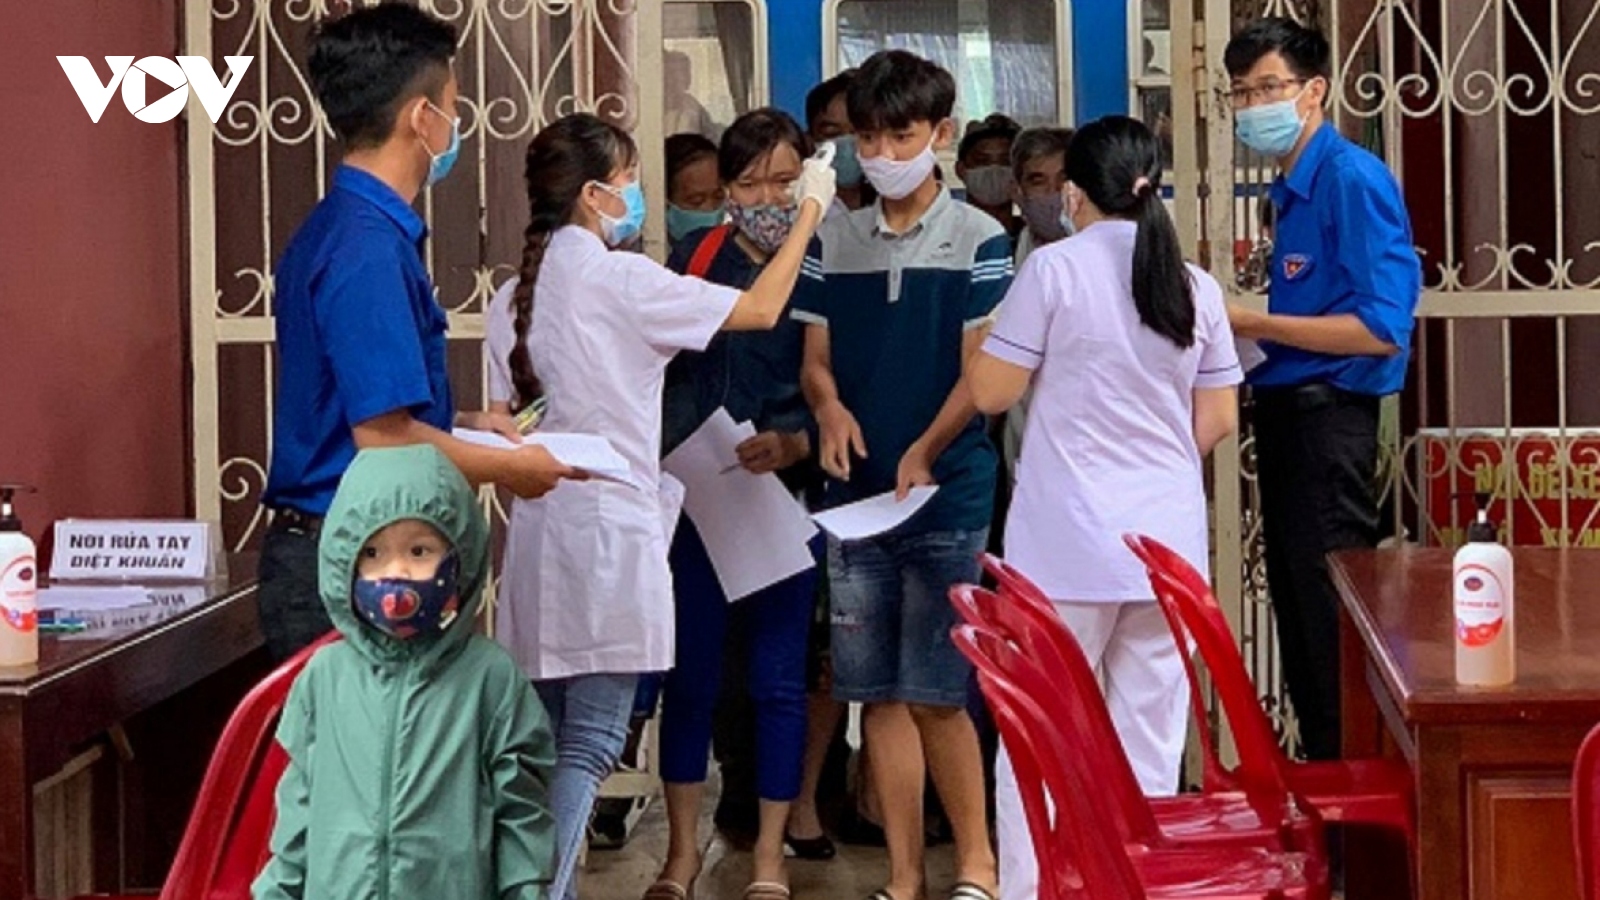 Thua Thien-Hue province removes all COVID-19 epidemic checkpoints